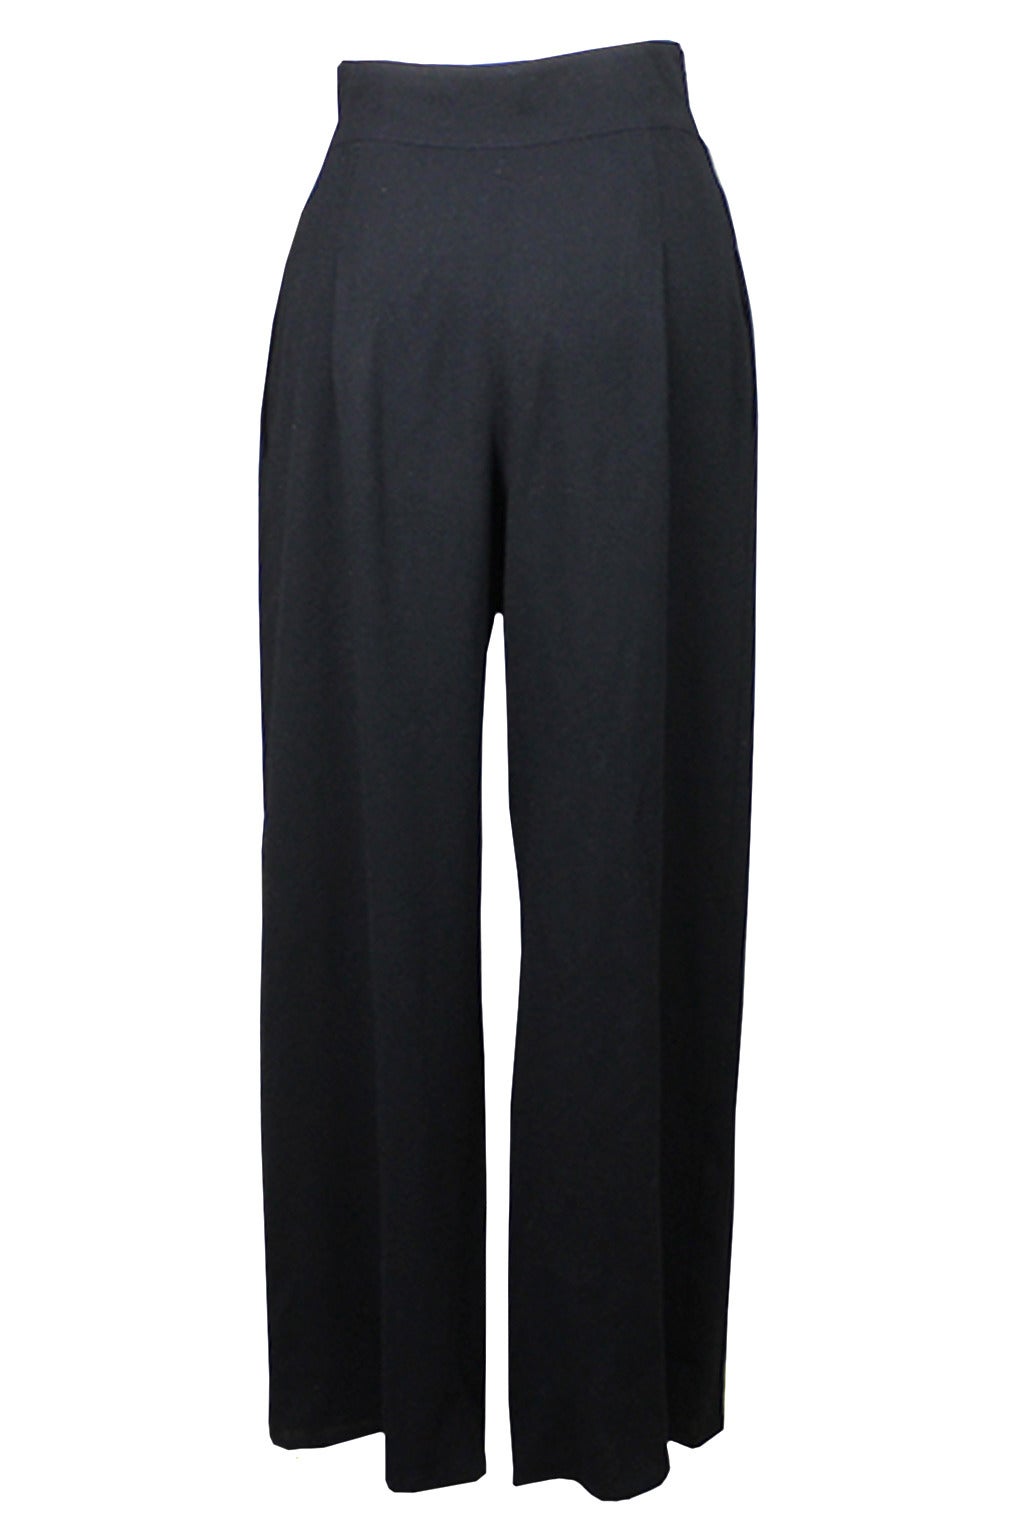 Chloe 1980s Woven High Waisted Draped Trousers In Excellent Condition In New York, NY